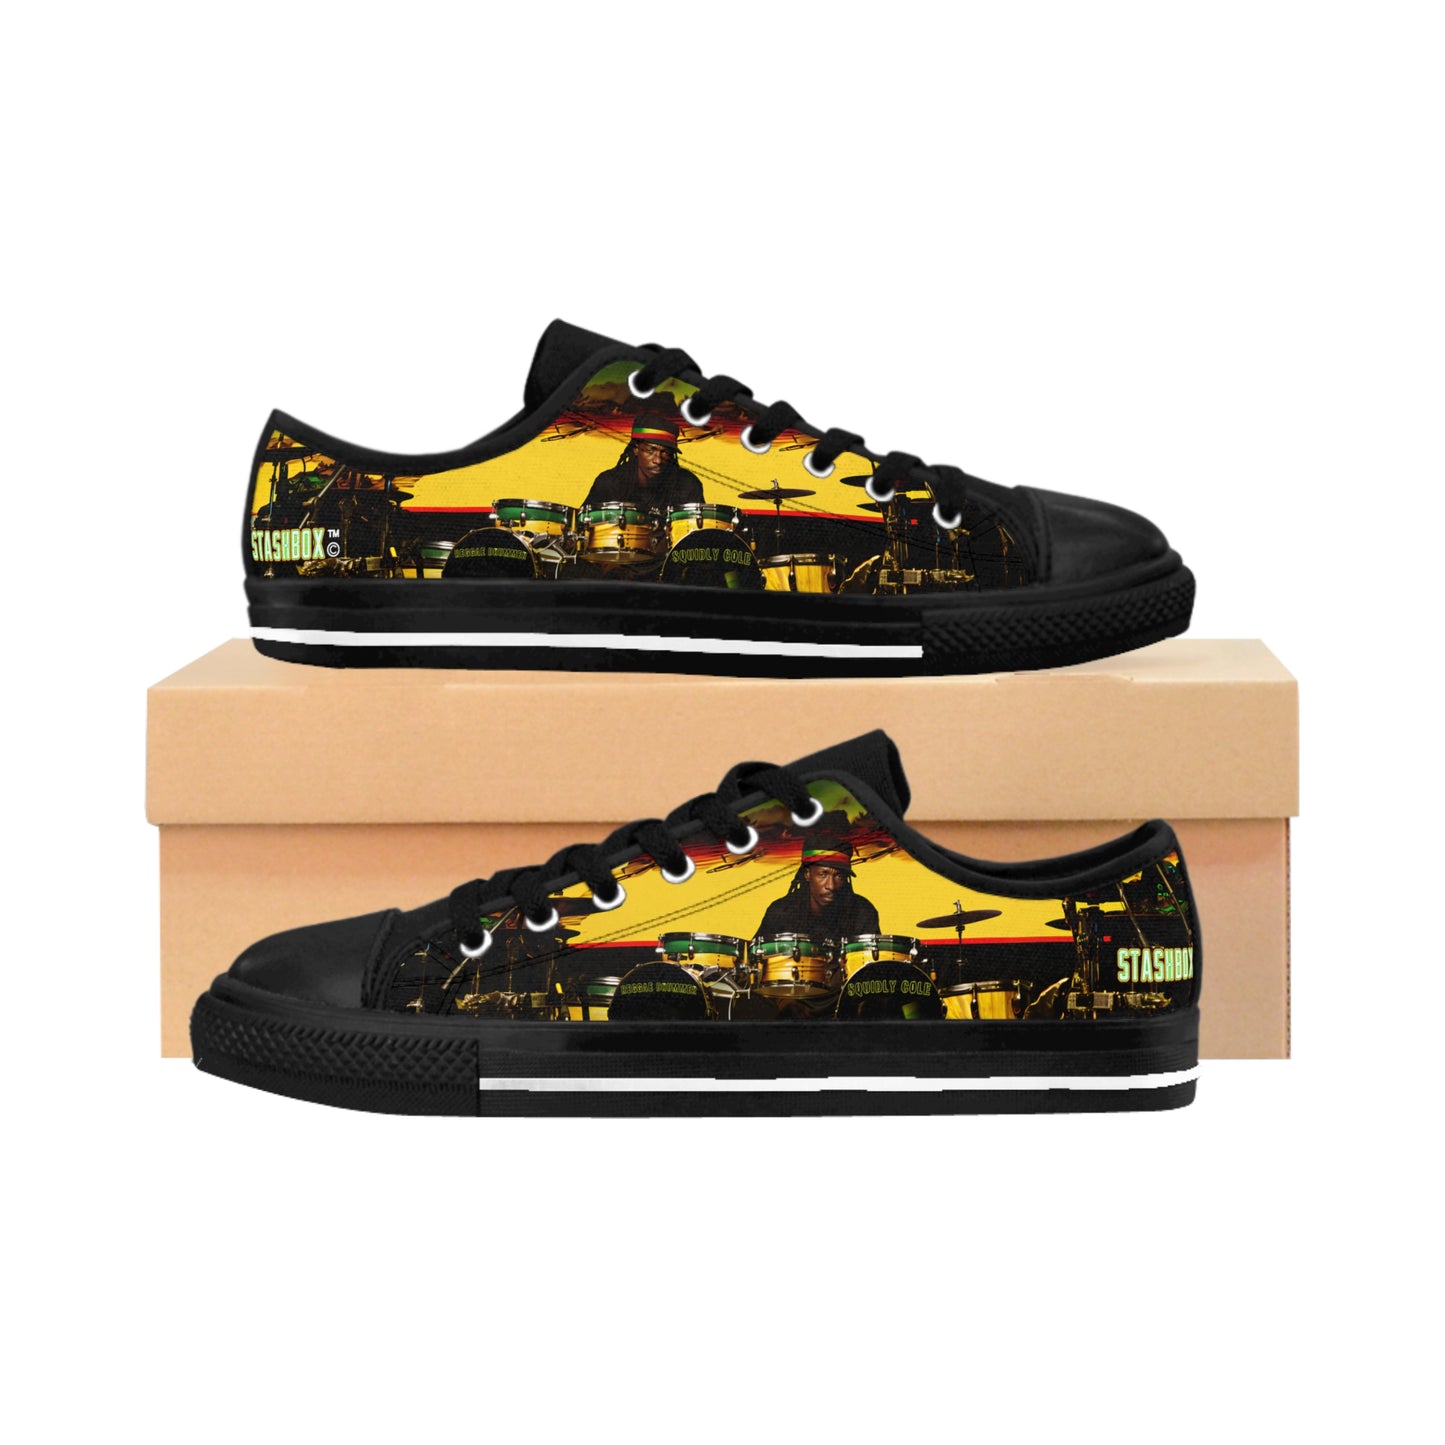 Black Shoes Official Squidly Cole Reggae Drummer Signature Series